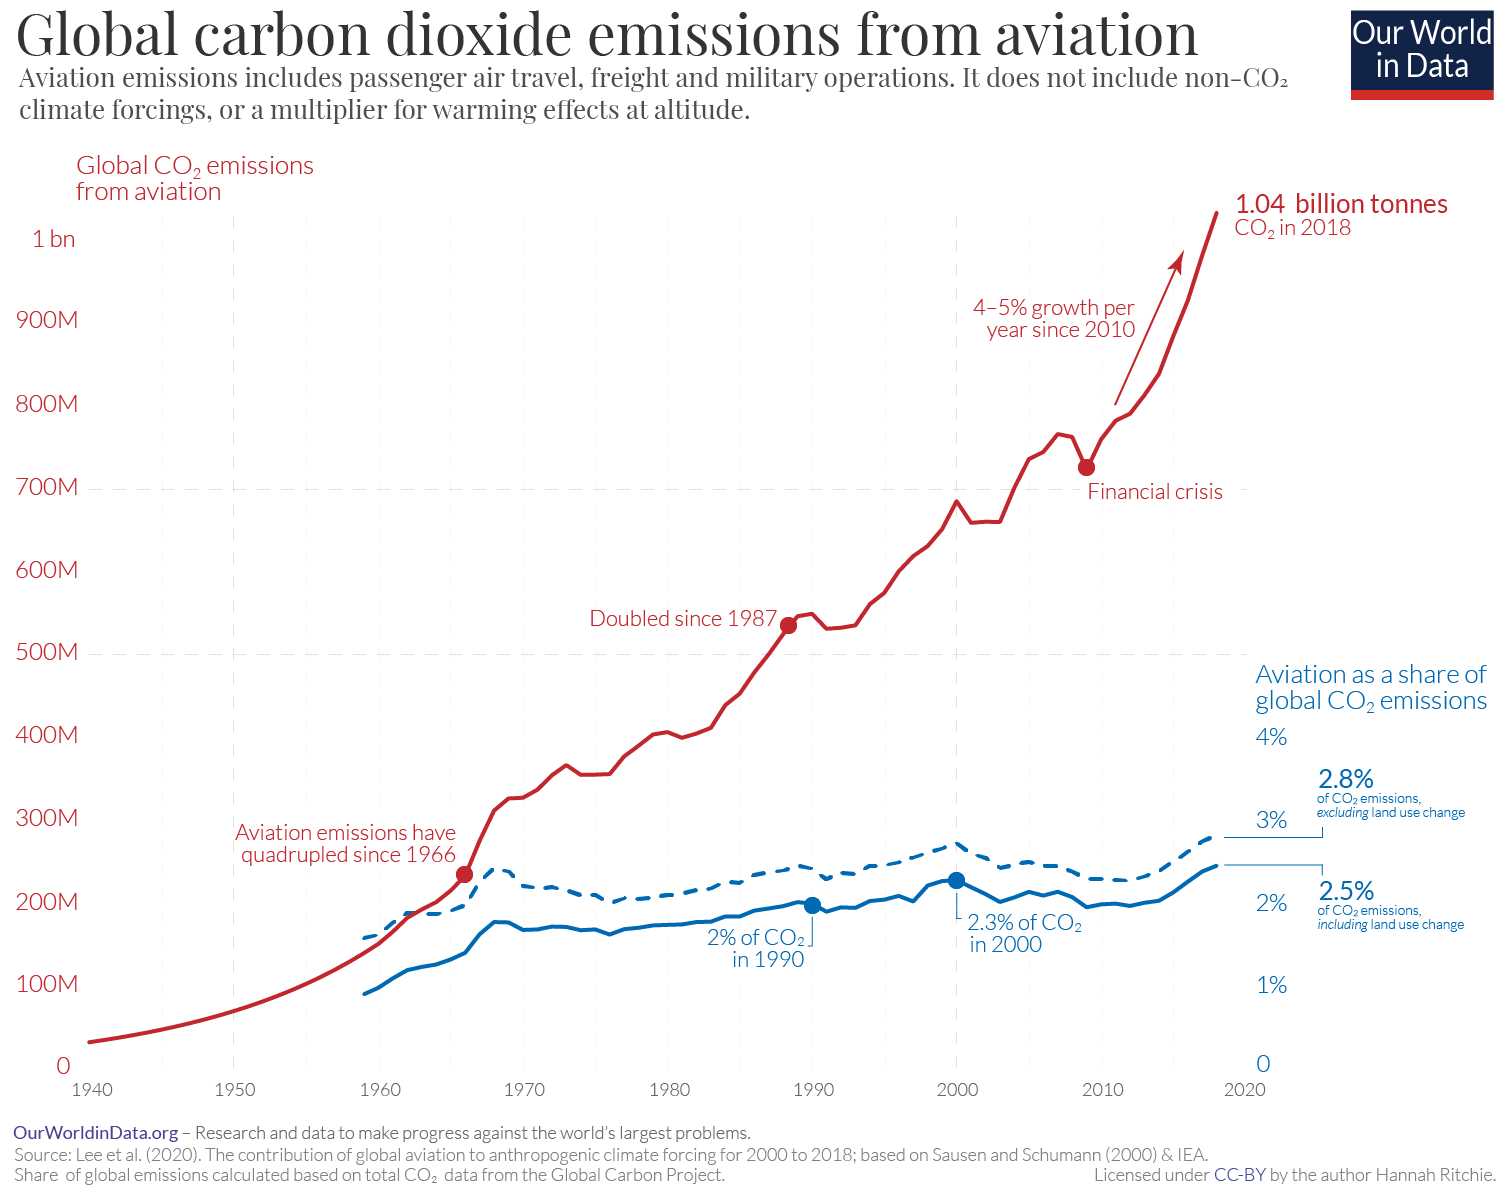 Climate change and flying